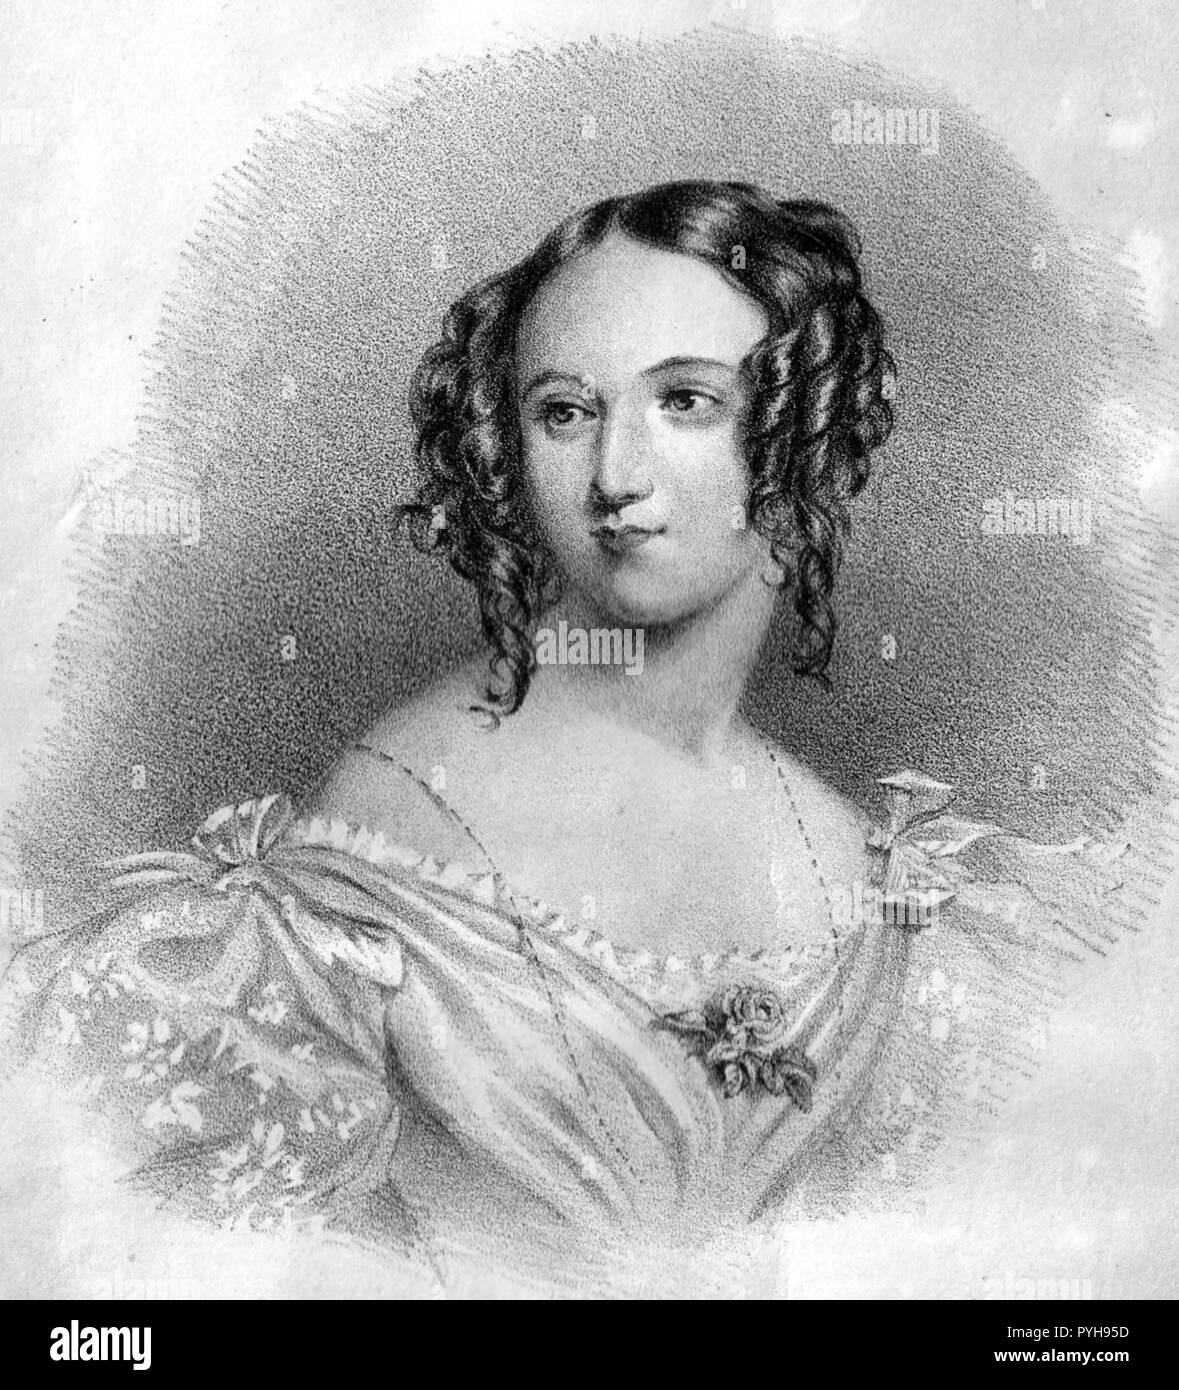 FLORA HASTINGS (1806-1839) aristocrate anglais Banque D'Images